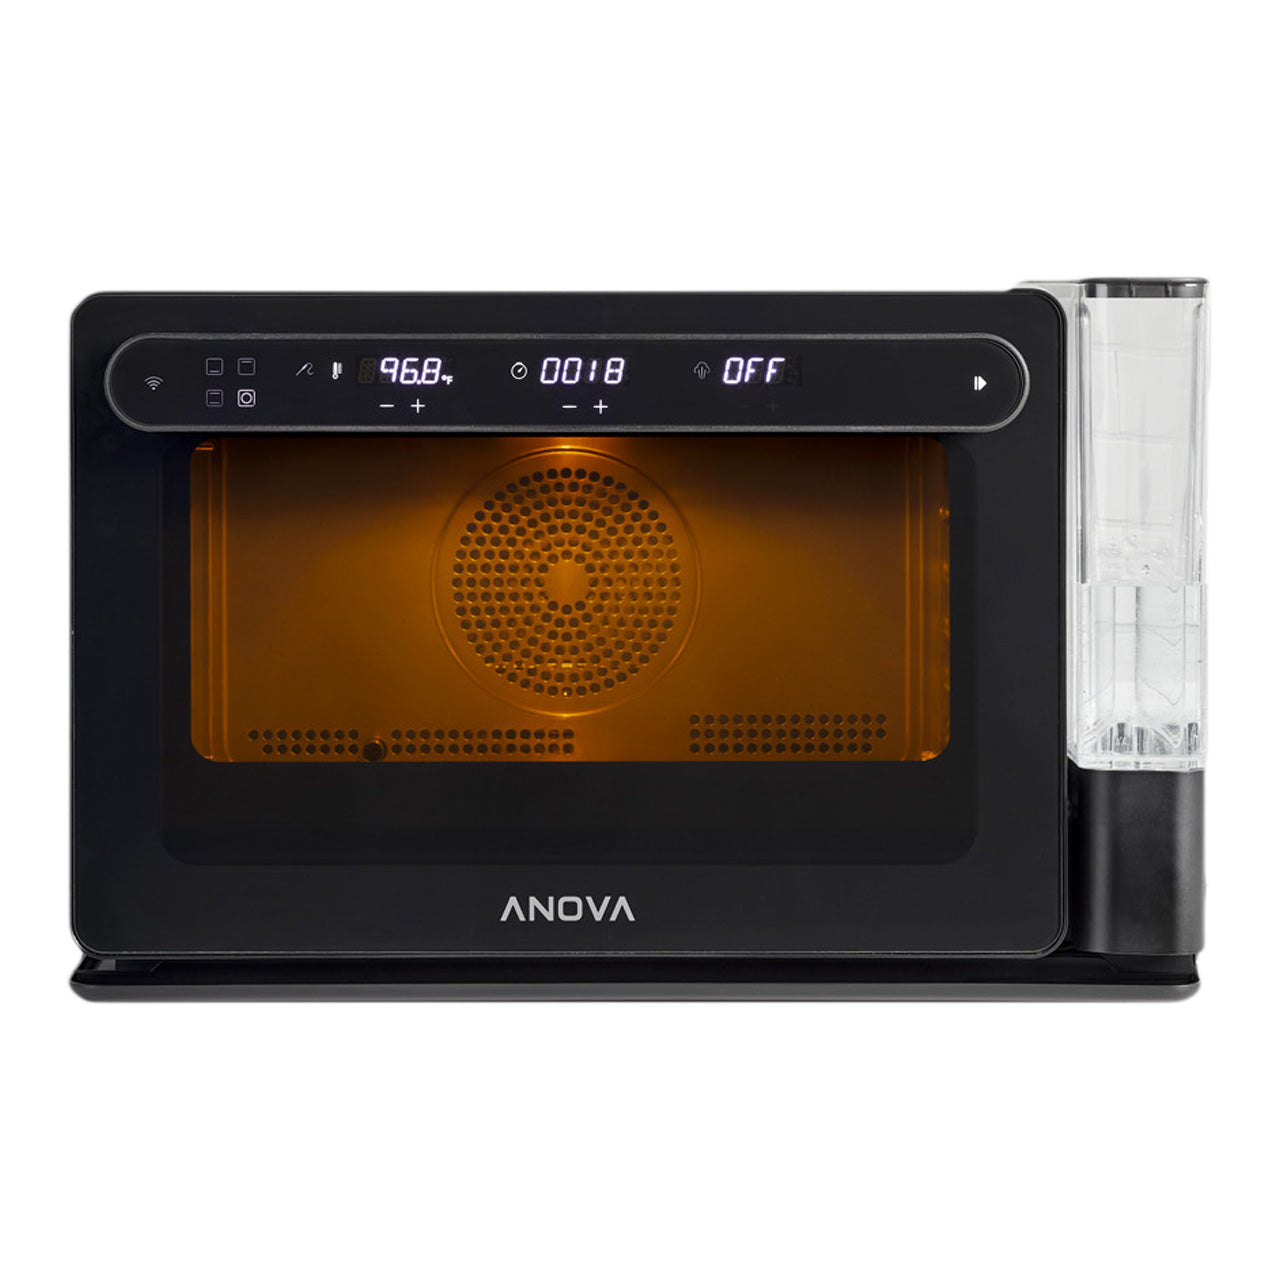 Anova Smart Precision Oven 35 Liters Sous Vide Electric Oven with Food Probe Temperature Control Touchscreen Display